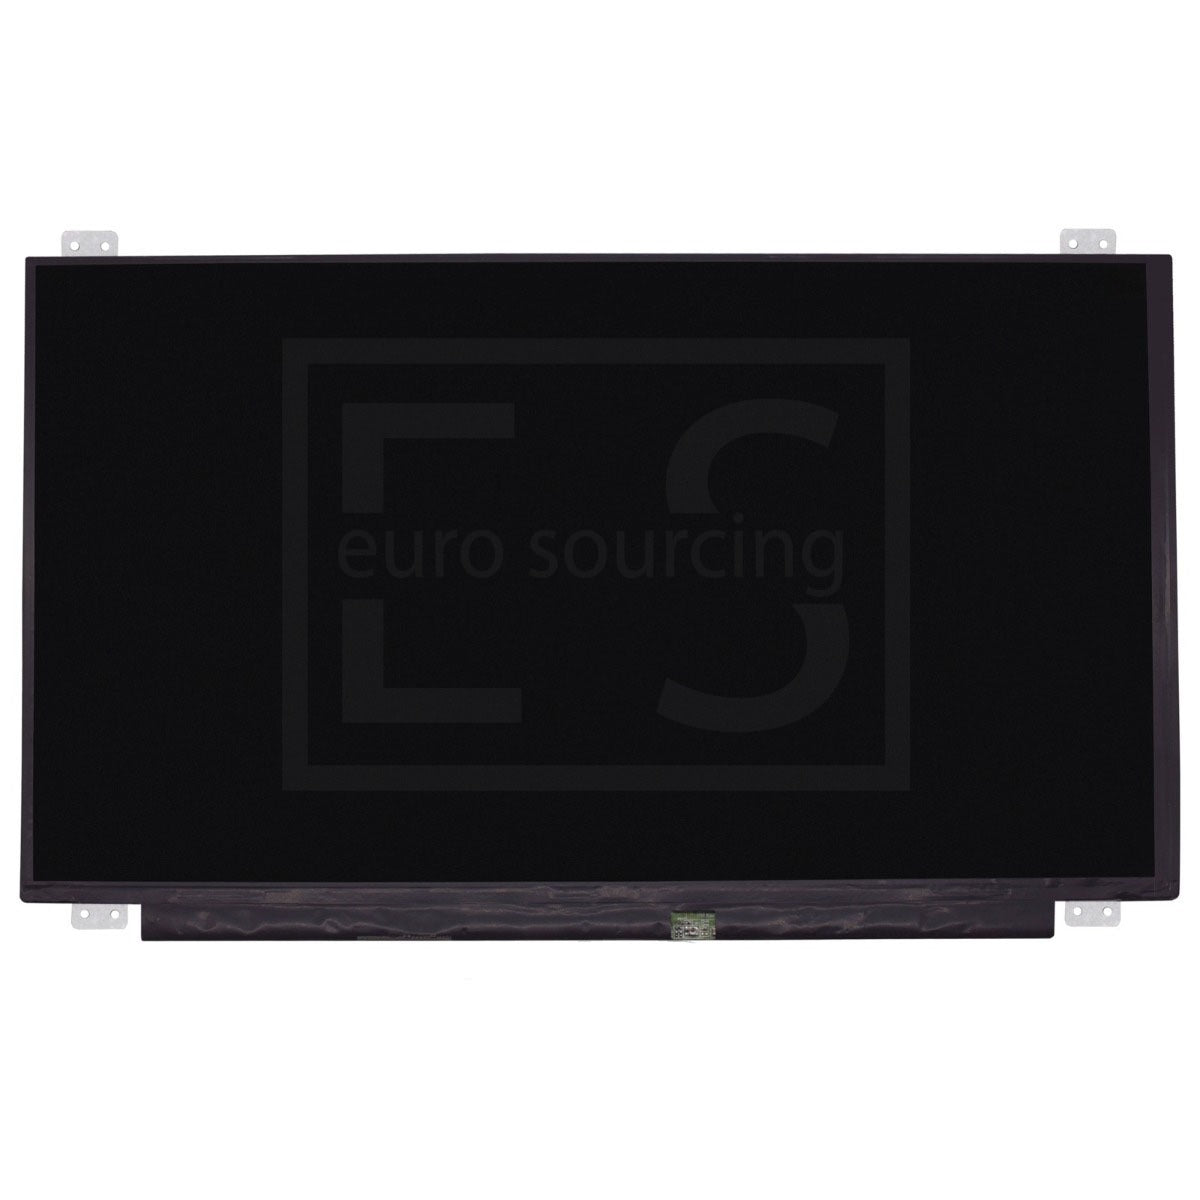 New Replacement LP156WF6 (SP)(K1) Screen 15.6" FHD LED NON IPS MATTE DISPLAY PANEL Compatible With MSI GL62M 7RDX 1010JP